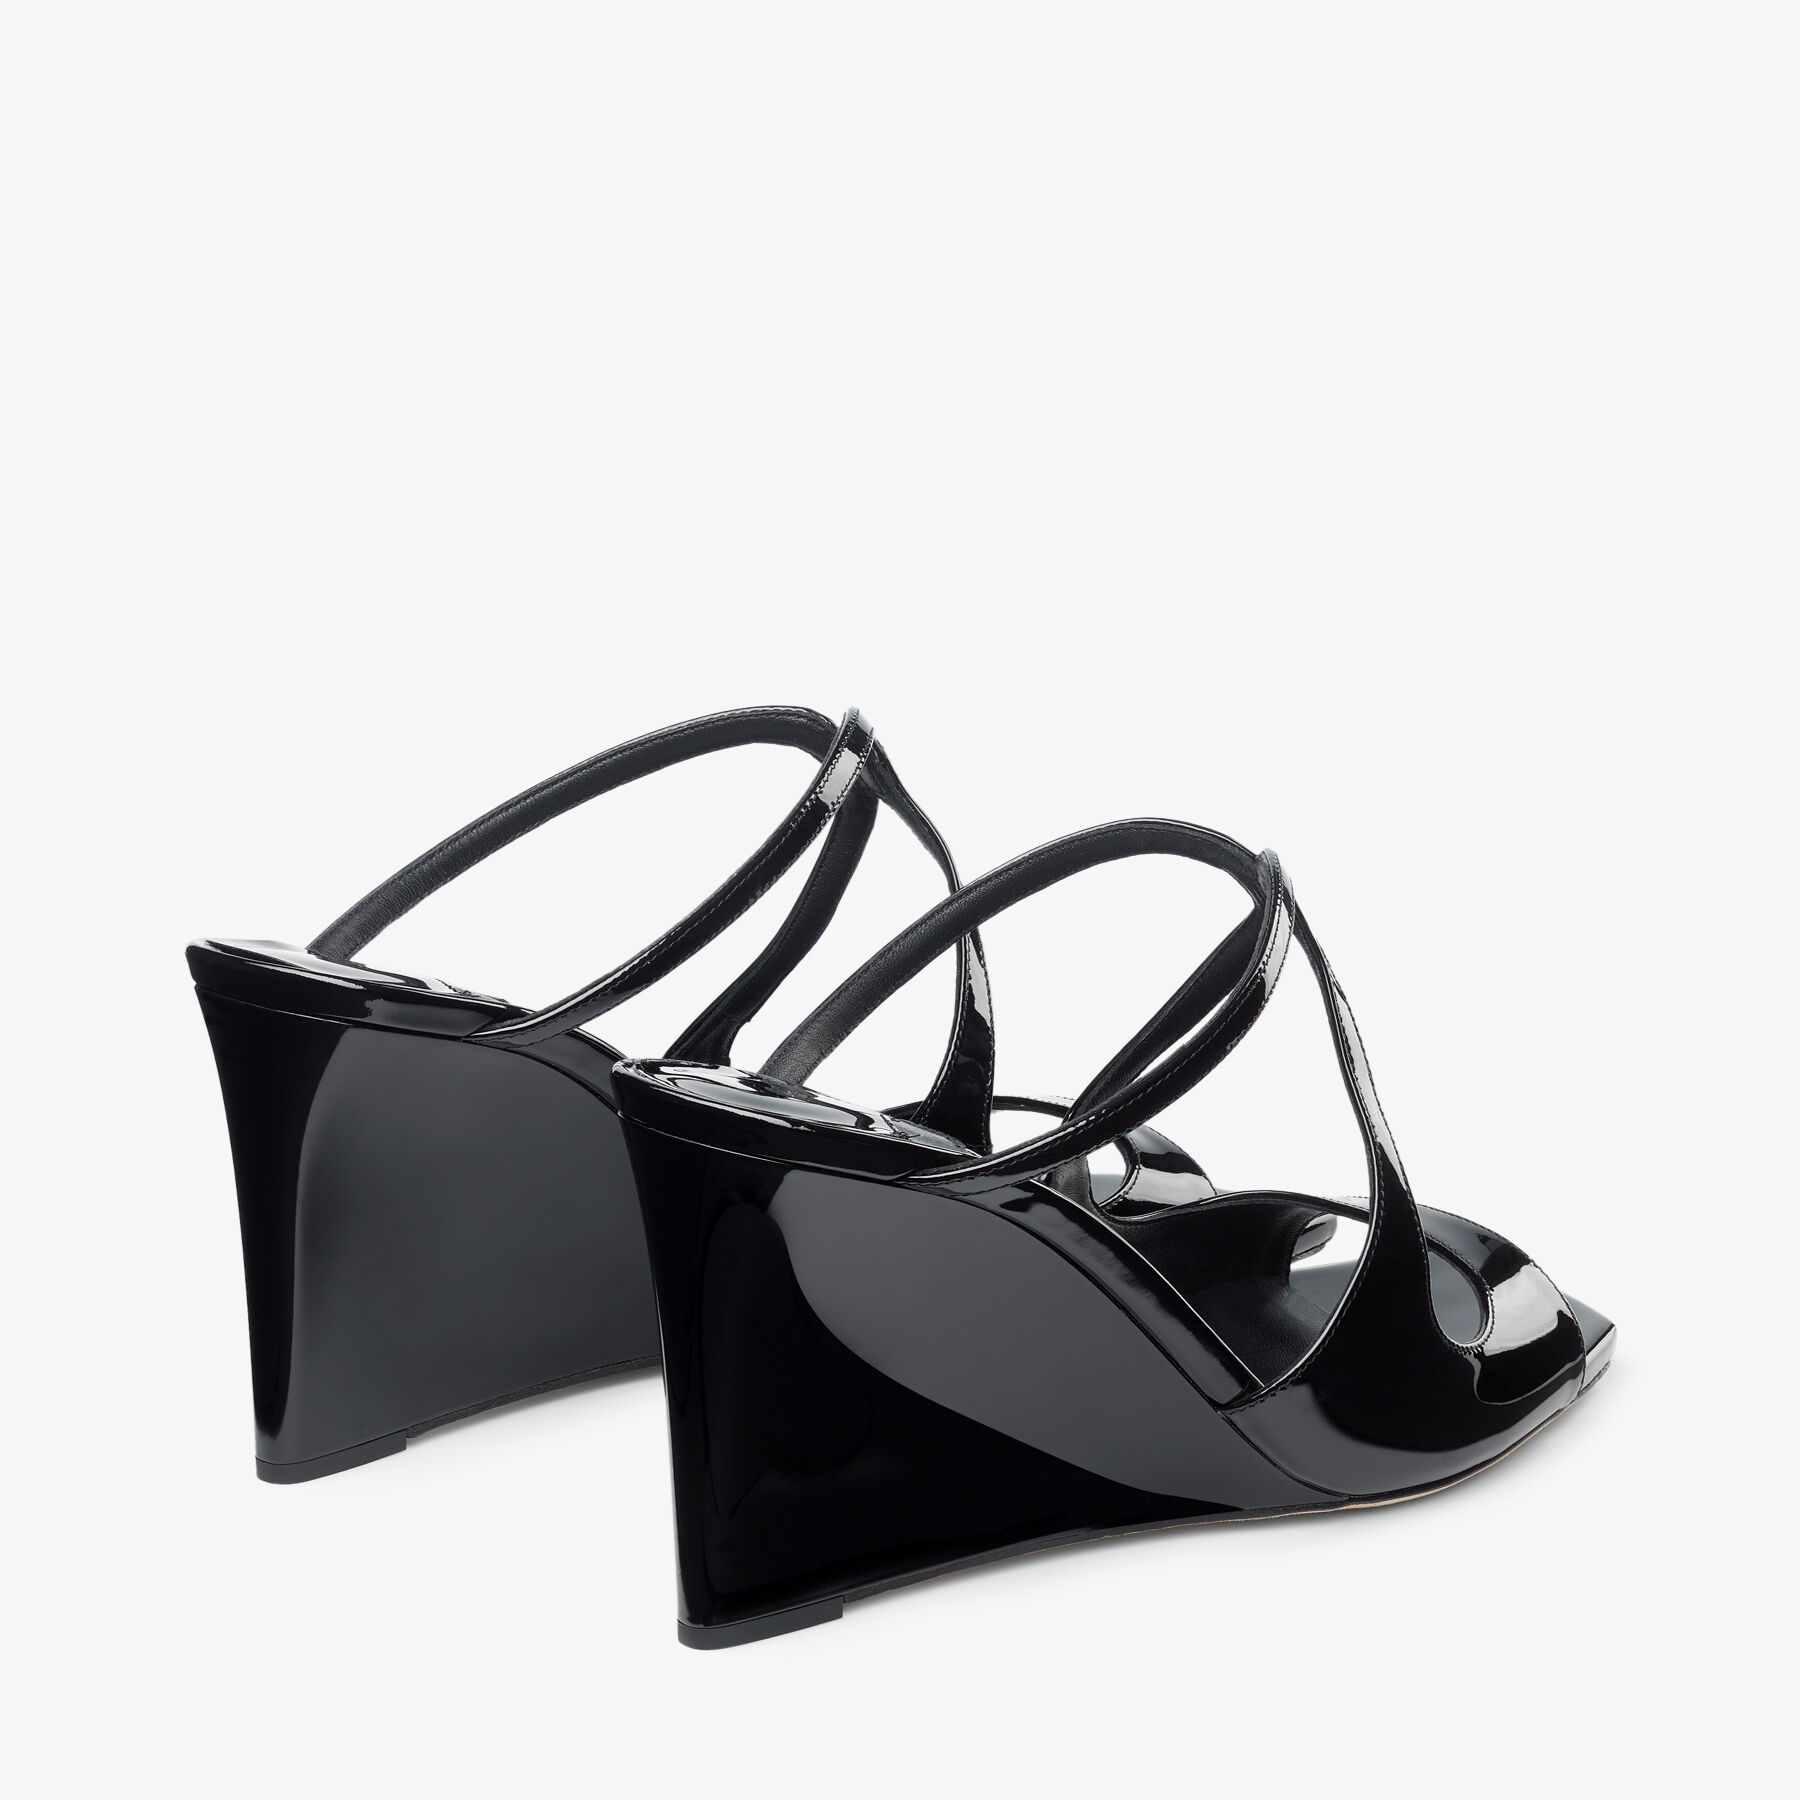 ANISE WEDGE 85 | Black Patent Leather Wedge Mules | Summer 